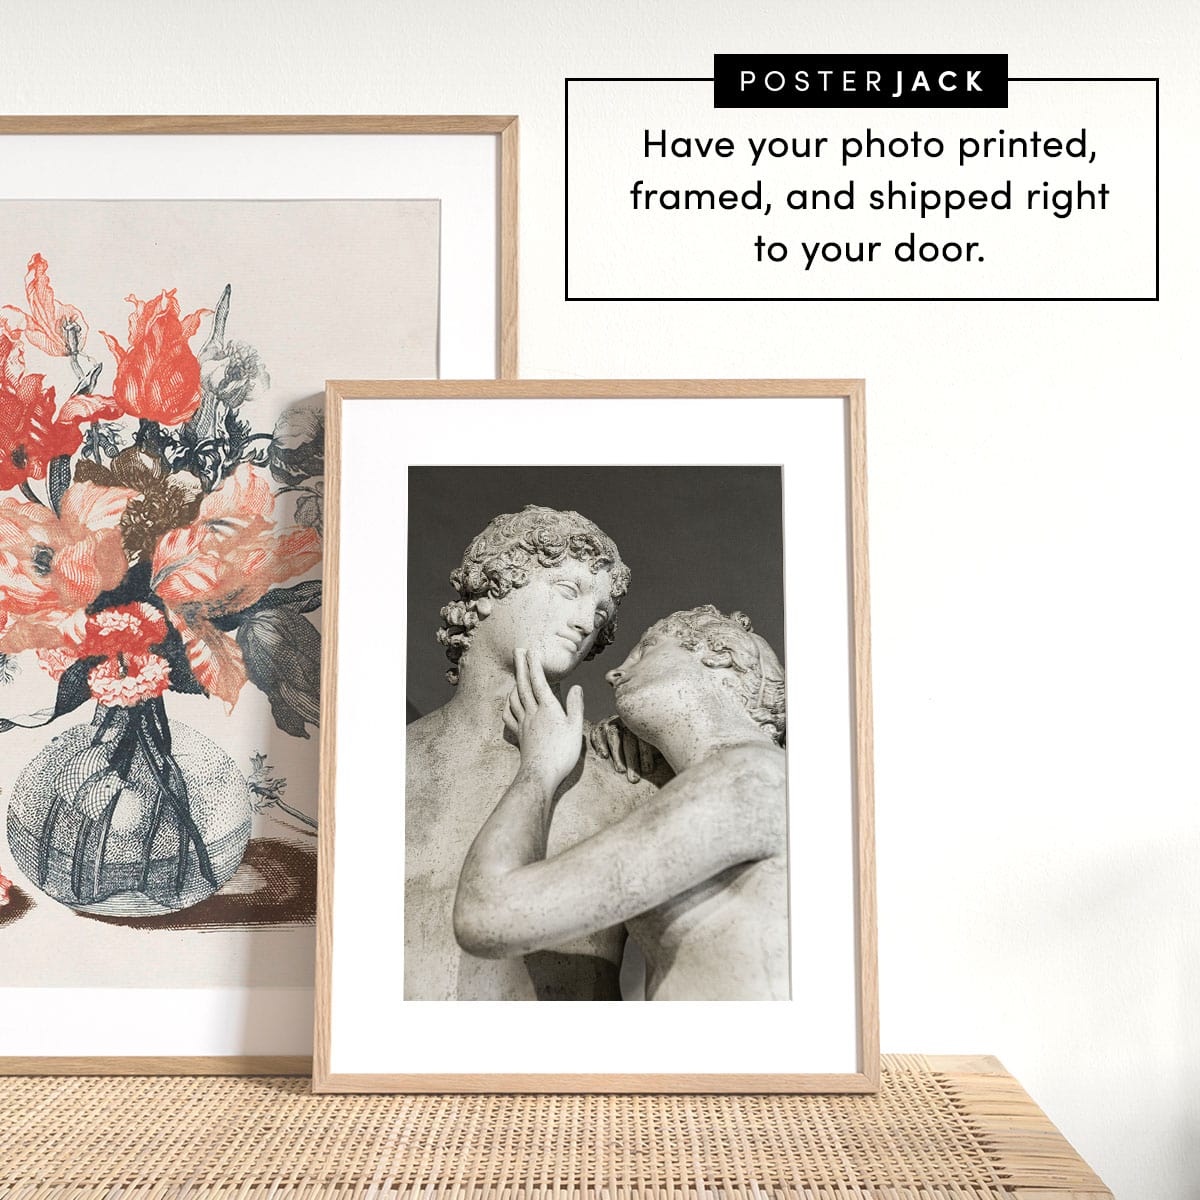 Art prints displayed in natural wood picture frames by Posterjack.